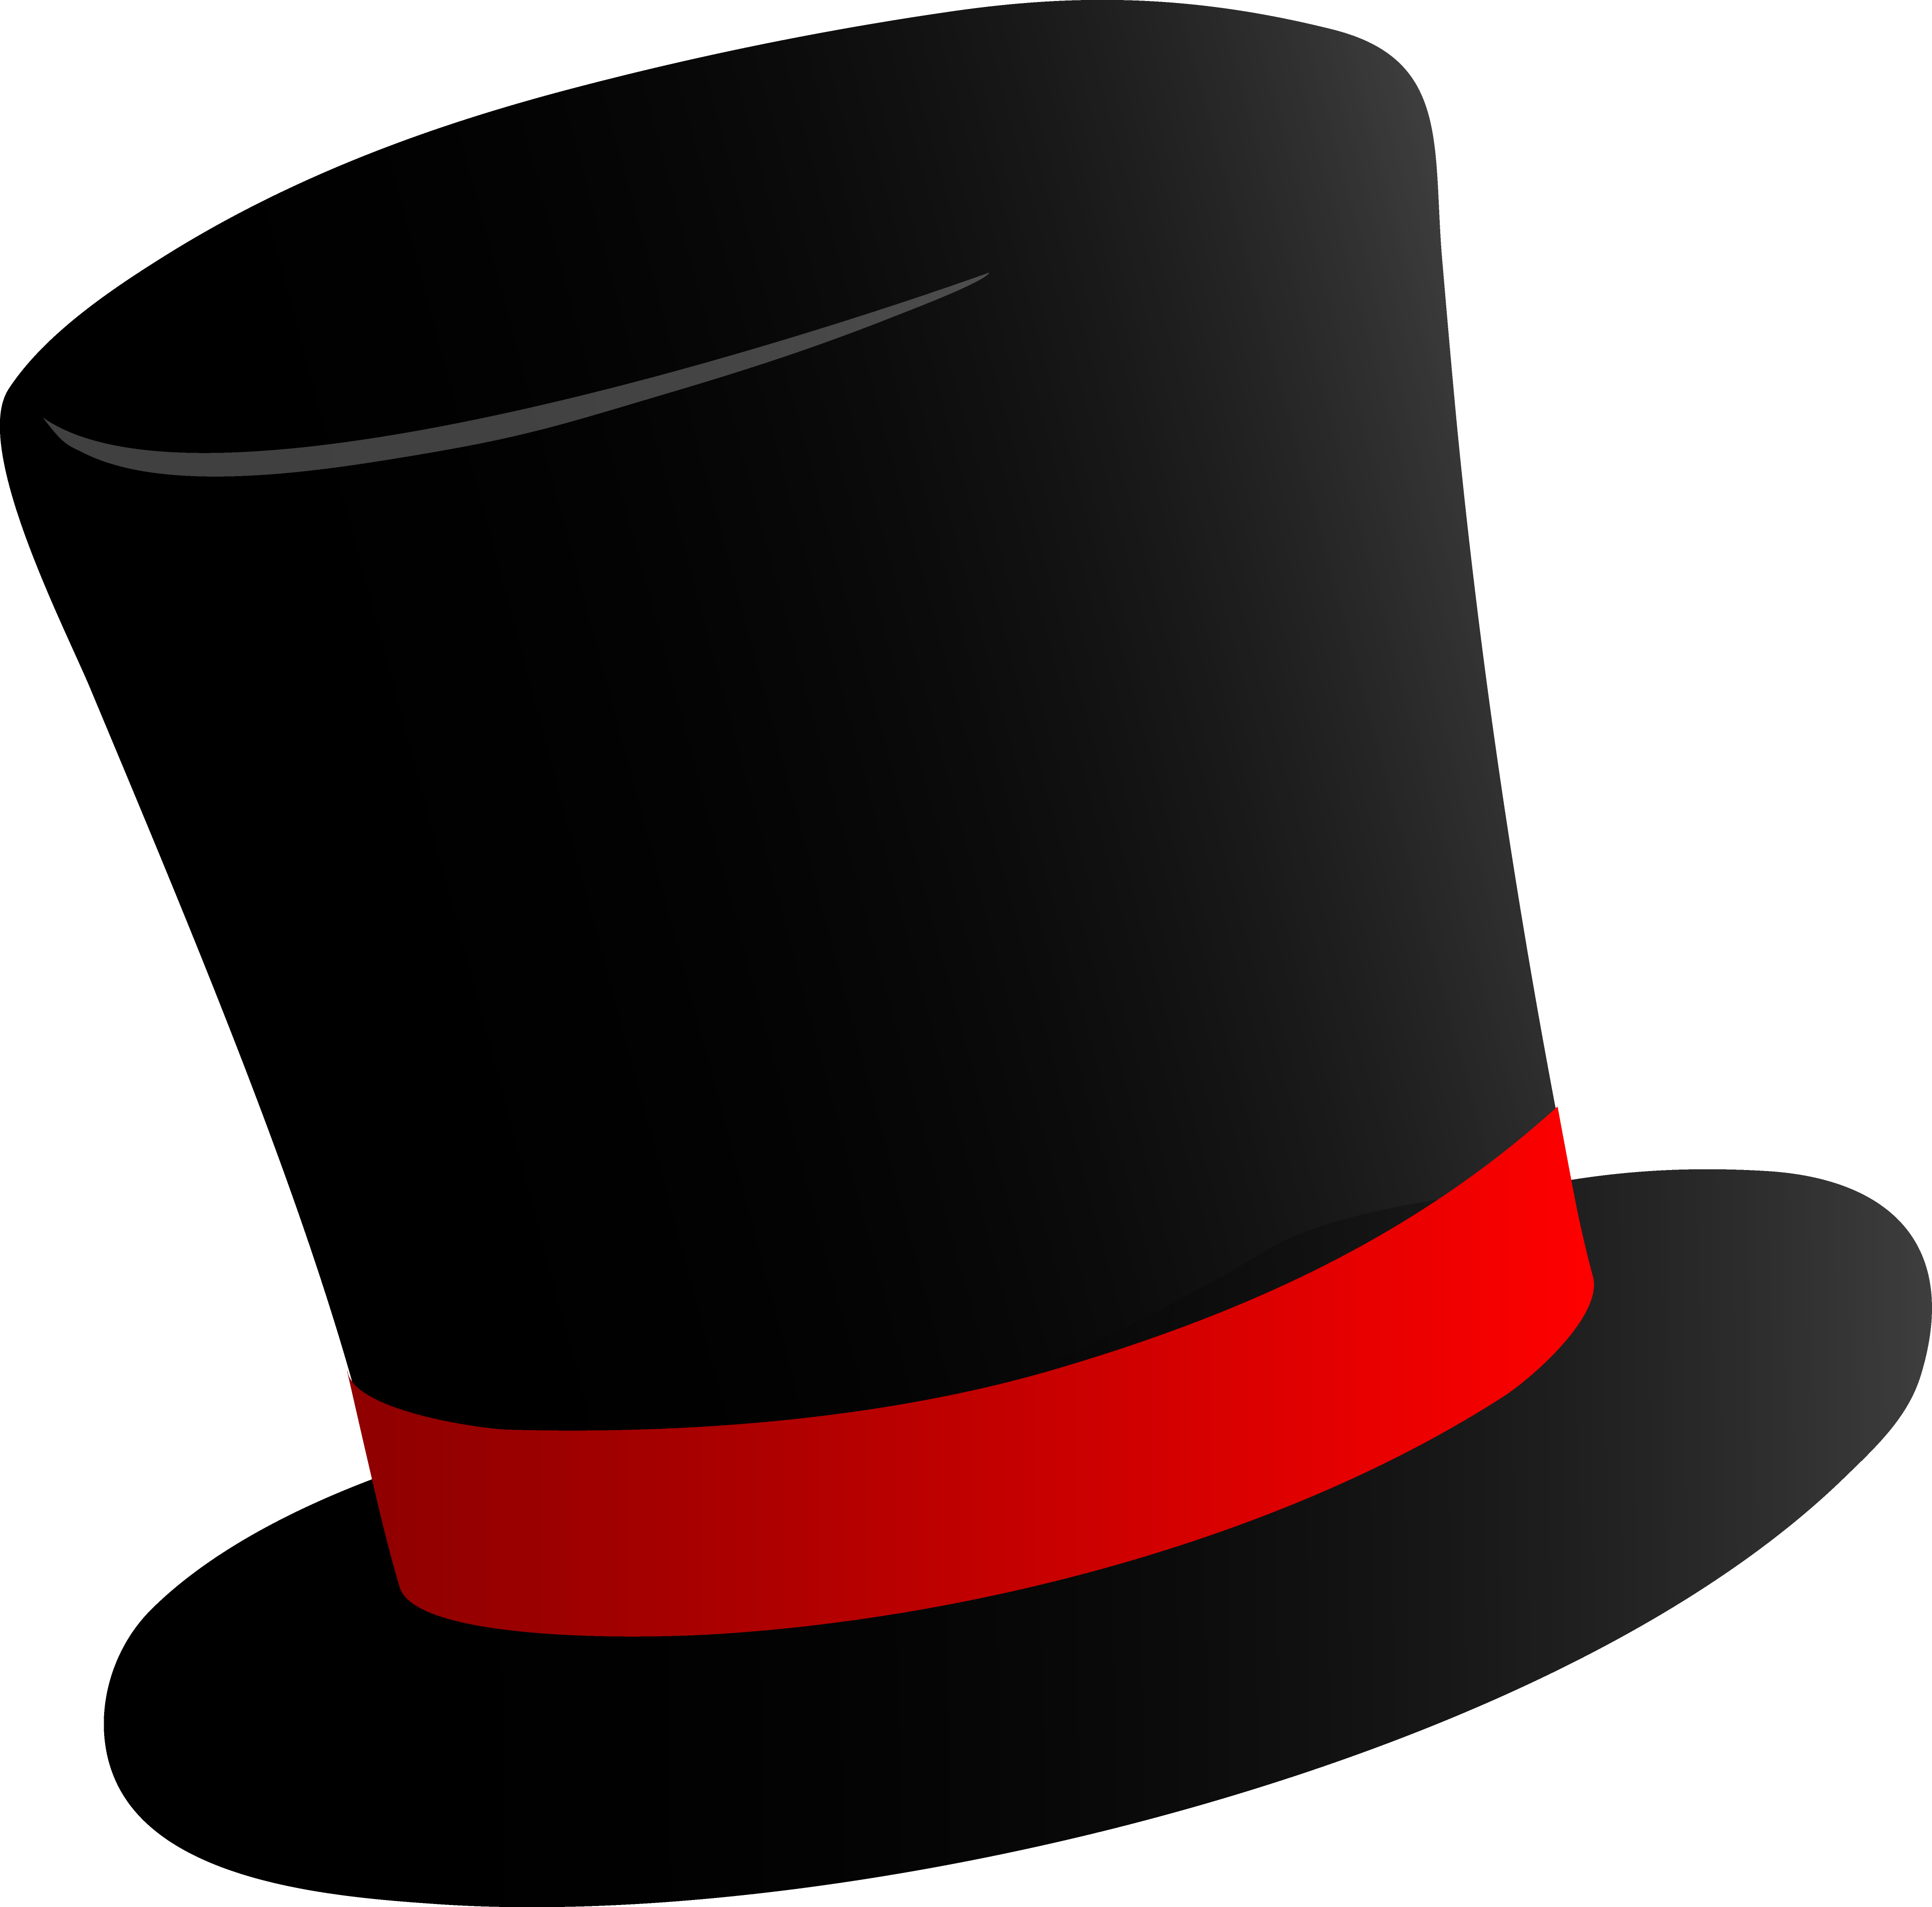 Top Hat Clipart - Free Clipart Images